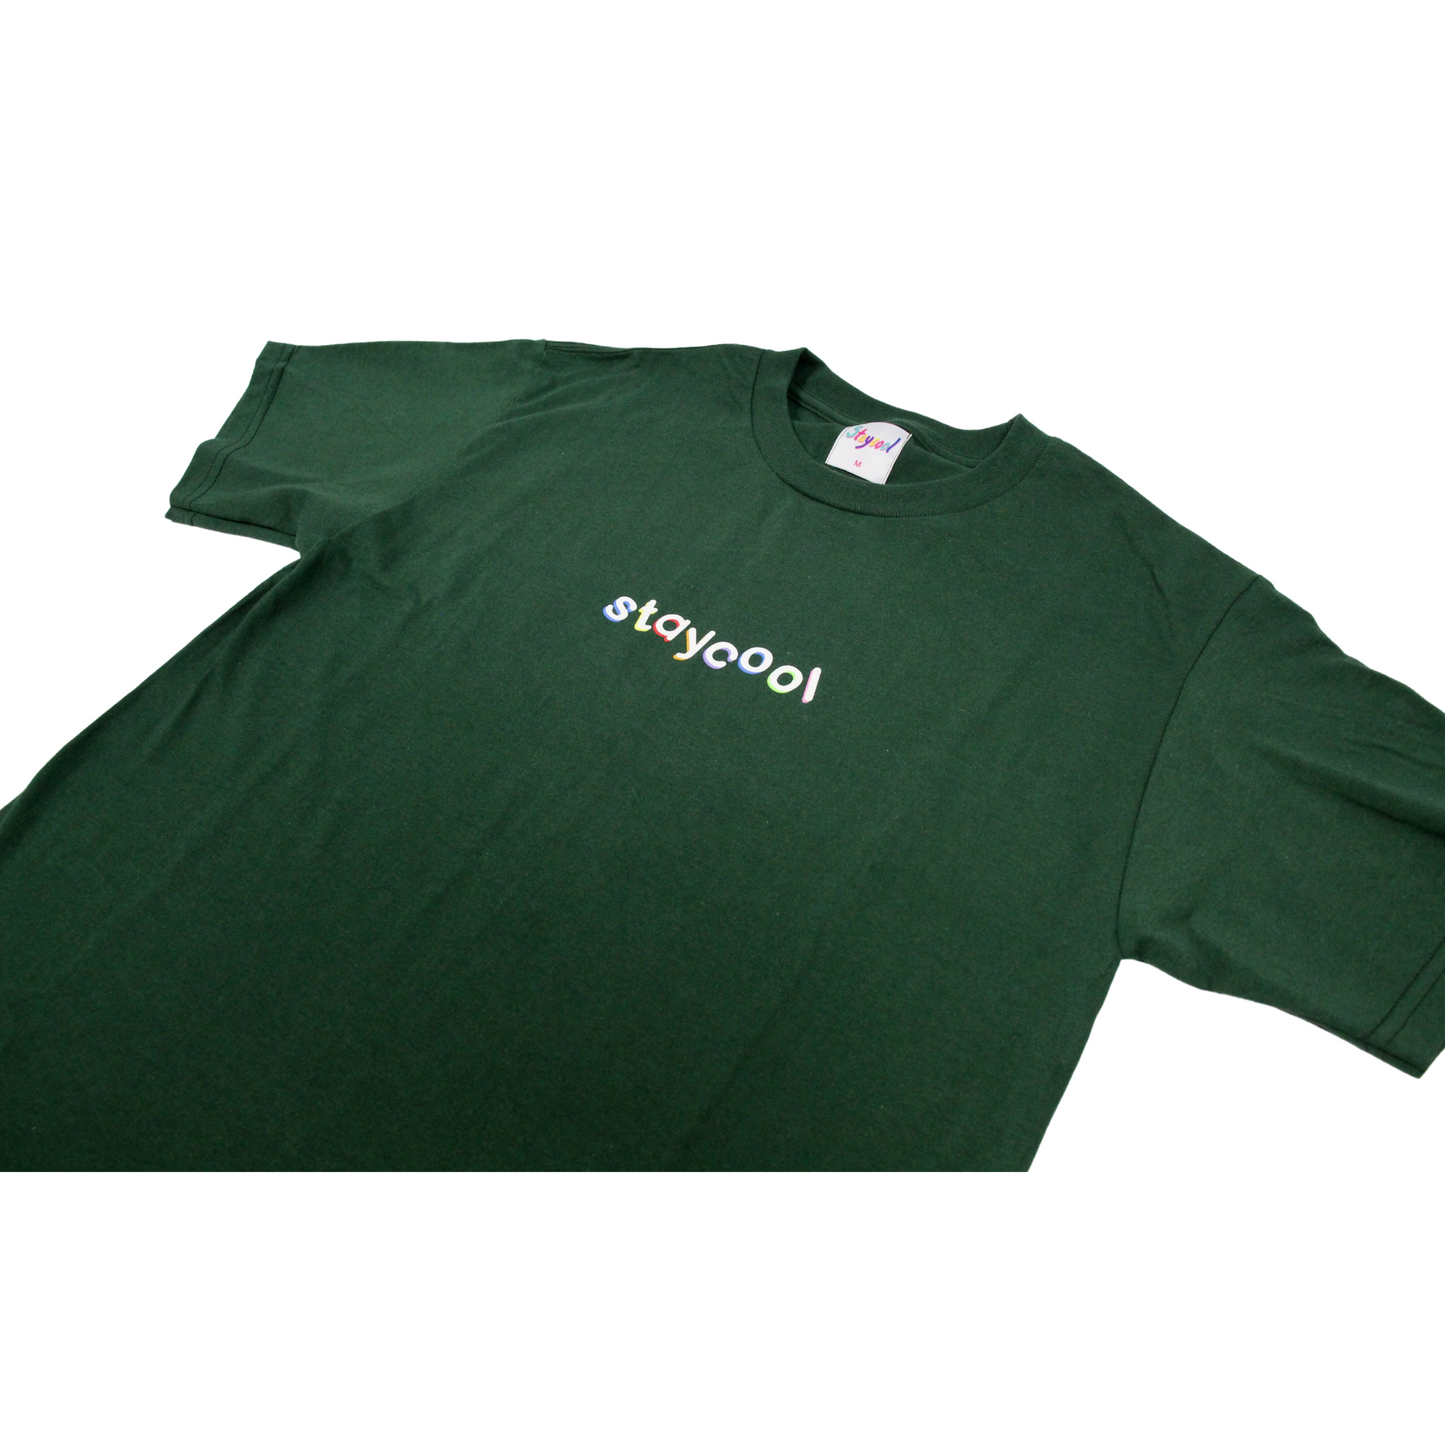 Staycoolnyc Classic Tee (Forest)